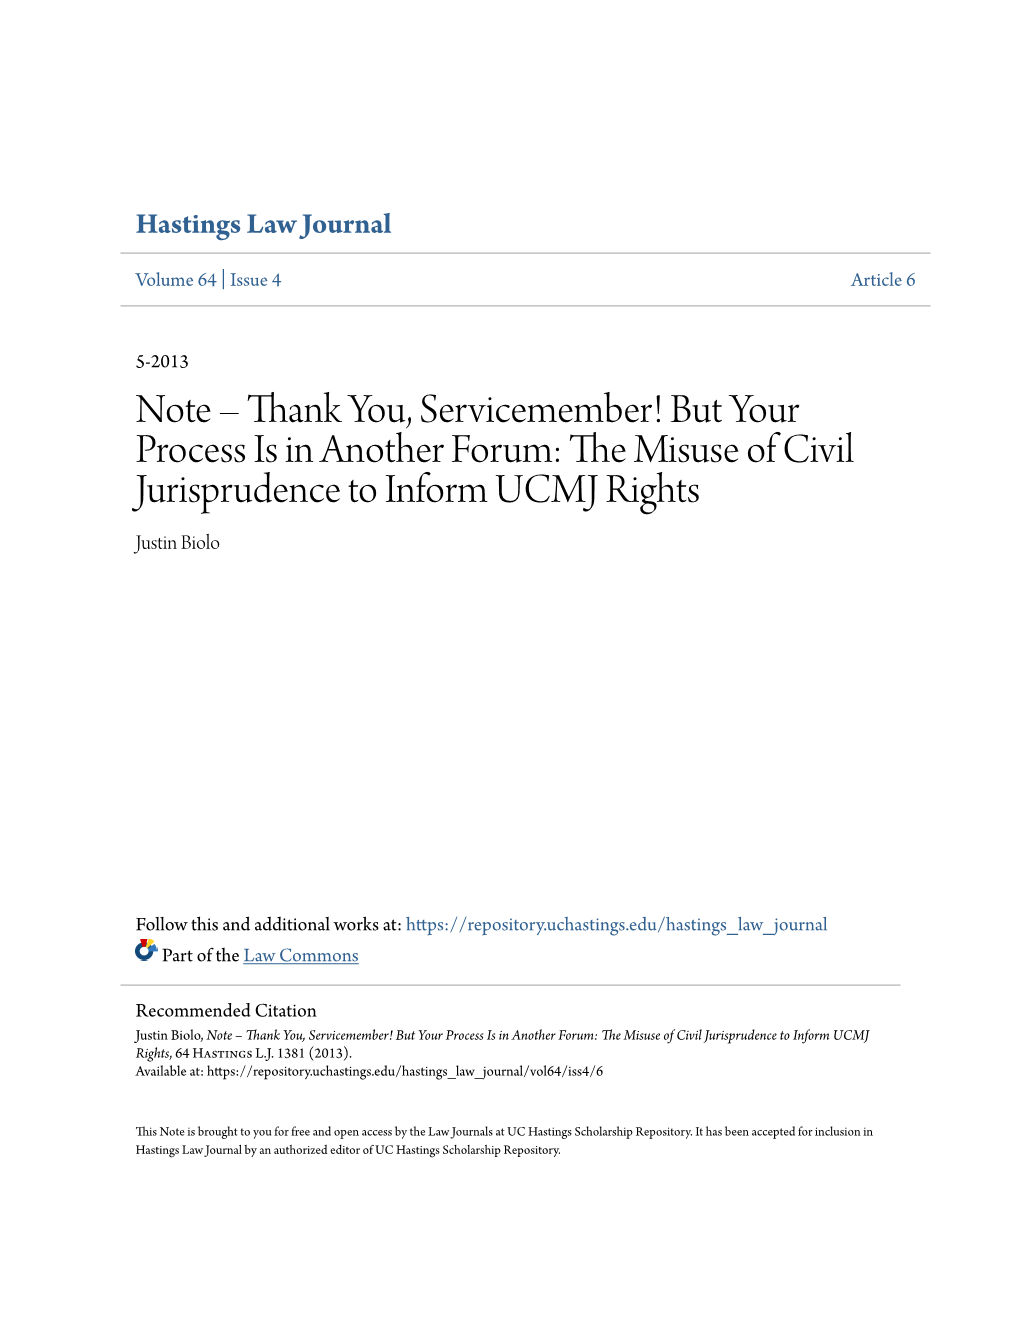 But Your Process Is in Another Forum: the Misuse of Civil Jurisprudence to Inform UCMJ Rights, 64 Hastings L.J